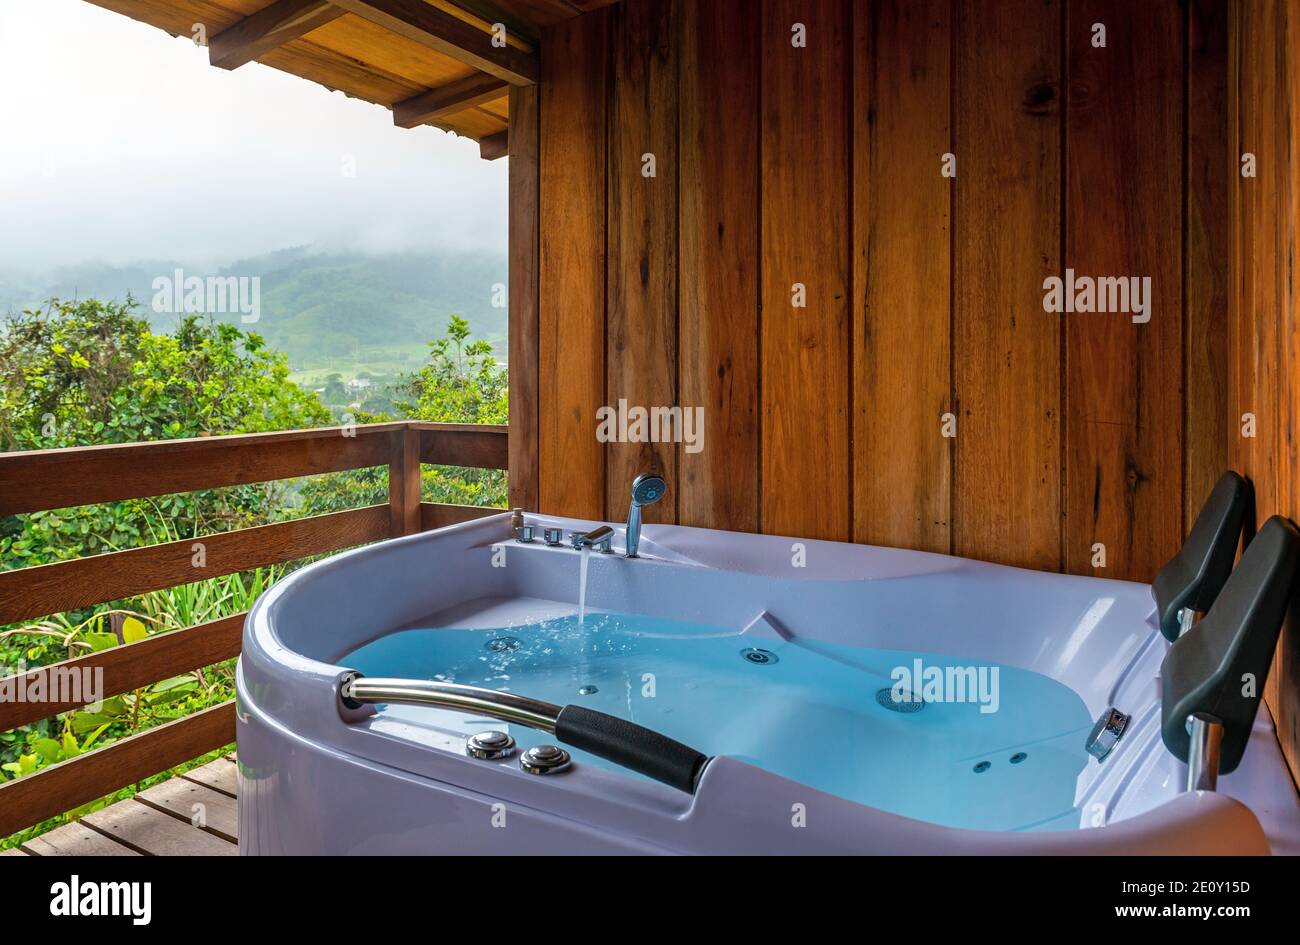 Jacuzzi tub on a balcony with view over the cloud forest, Mindo, Ecuador. Stock Photo